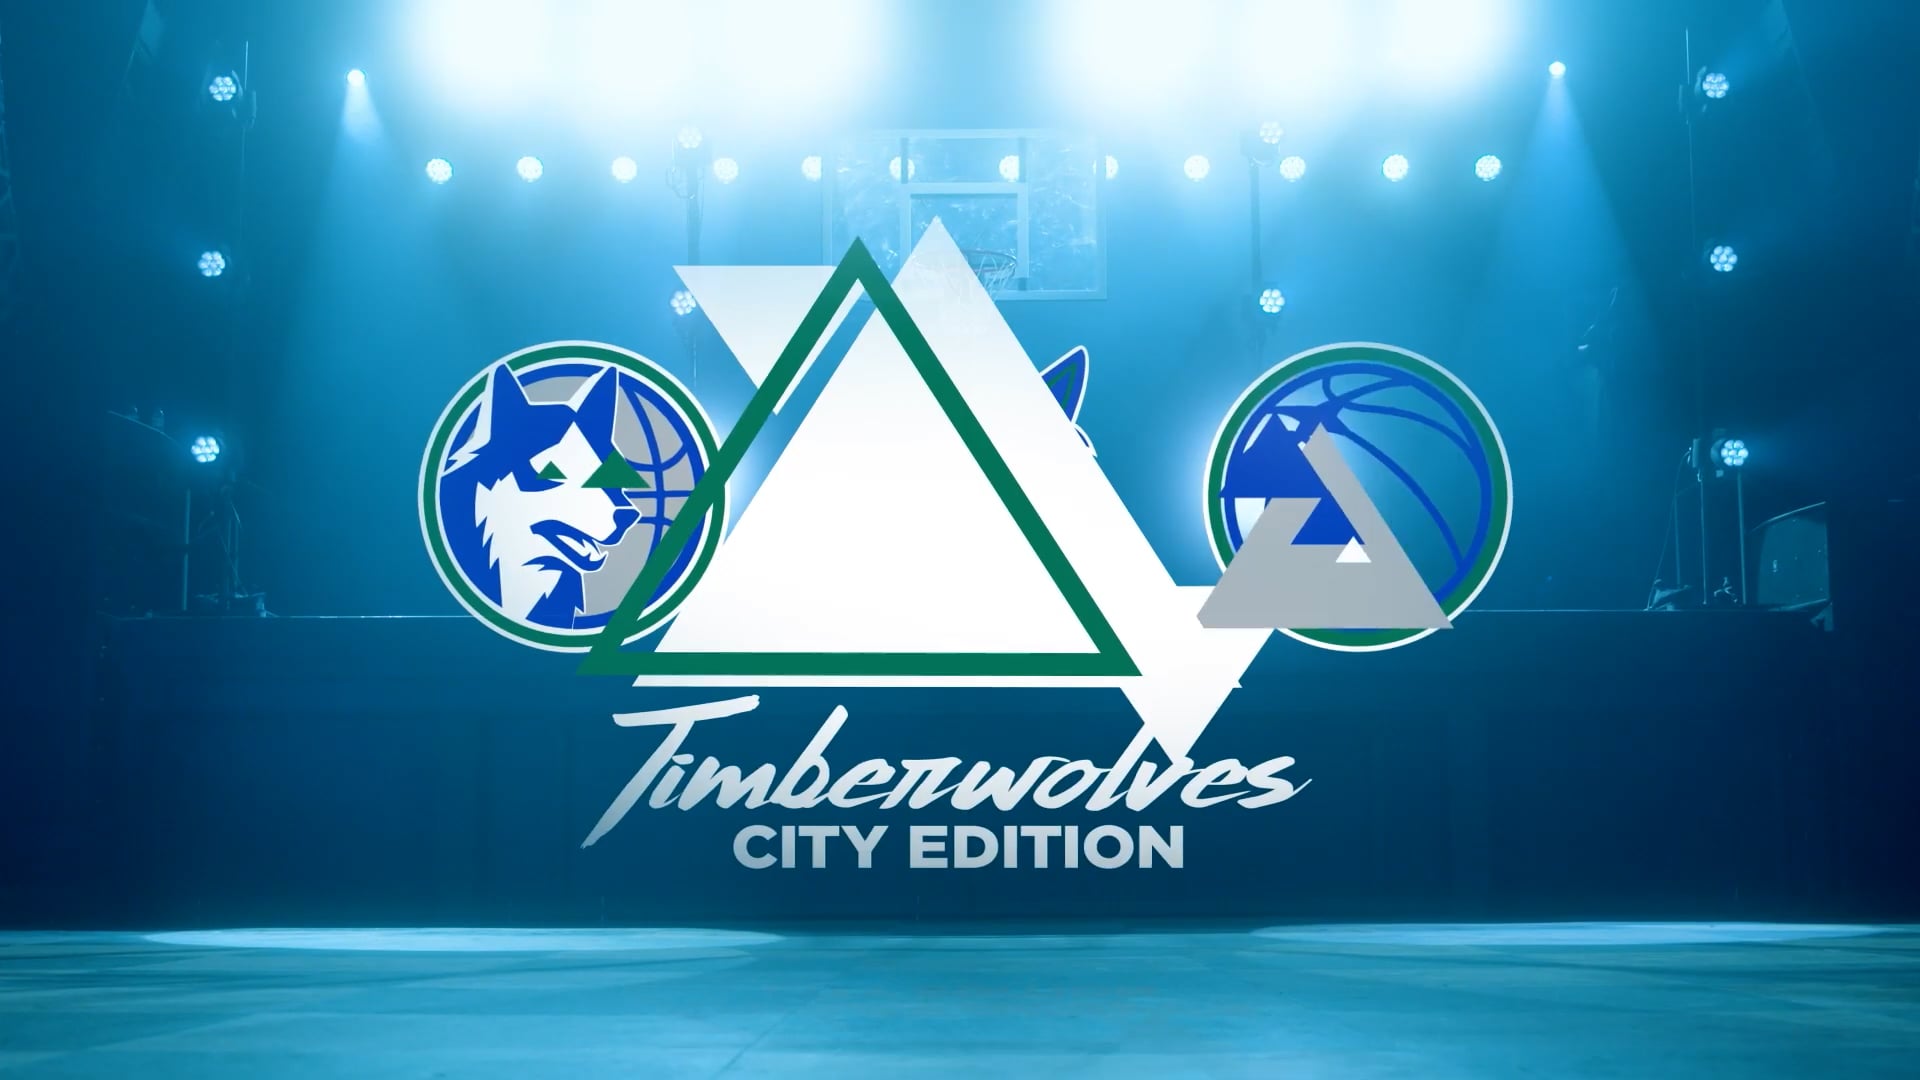 MN Timberwolves 21-22 City Edition Reveal